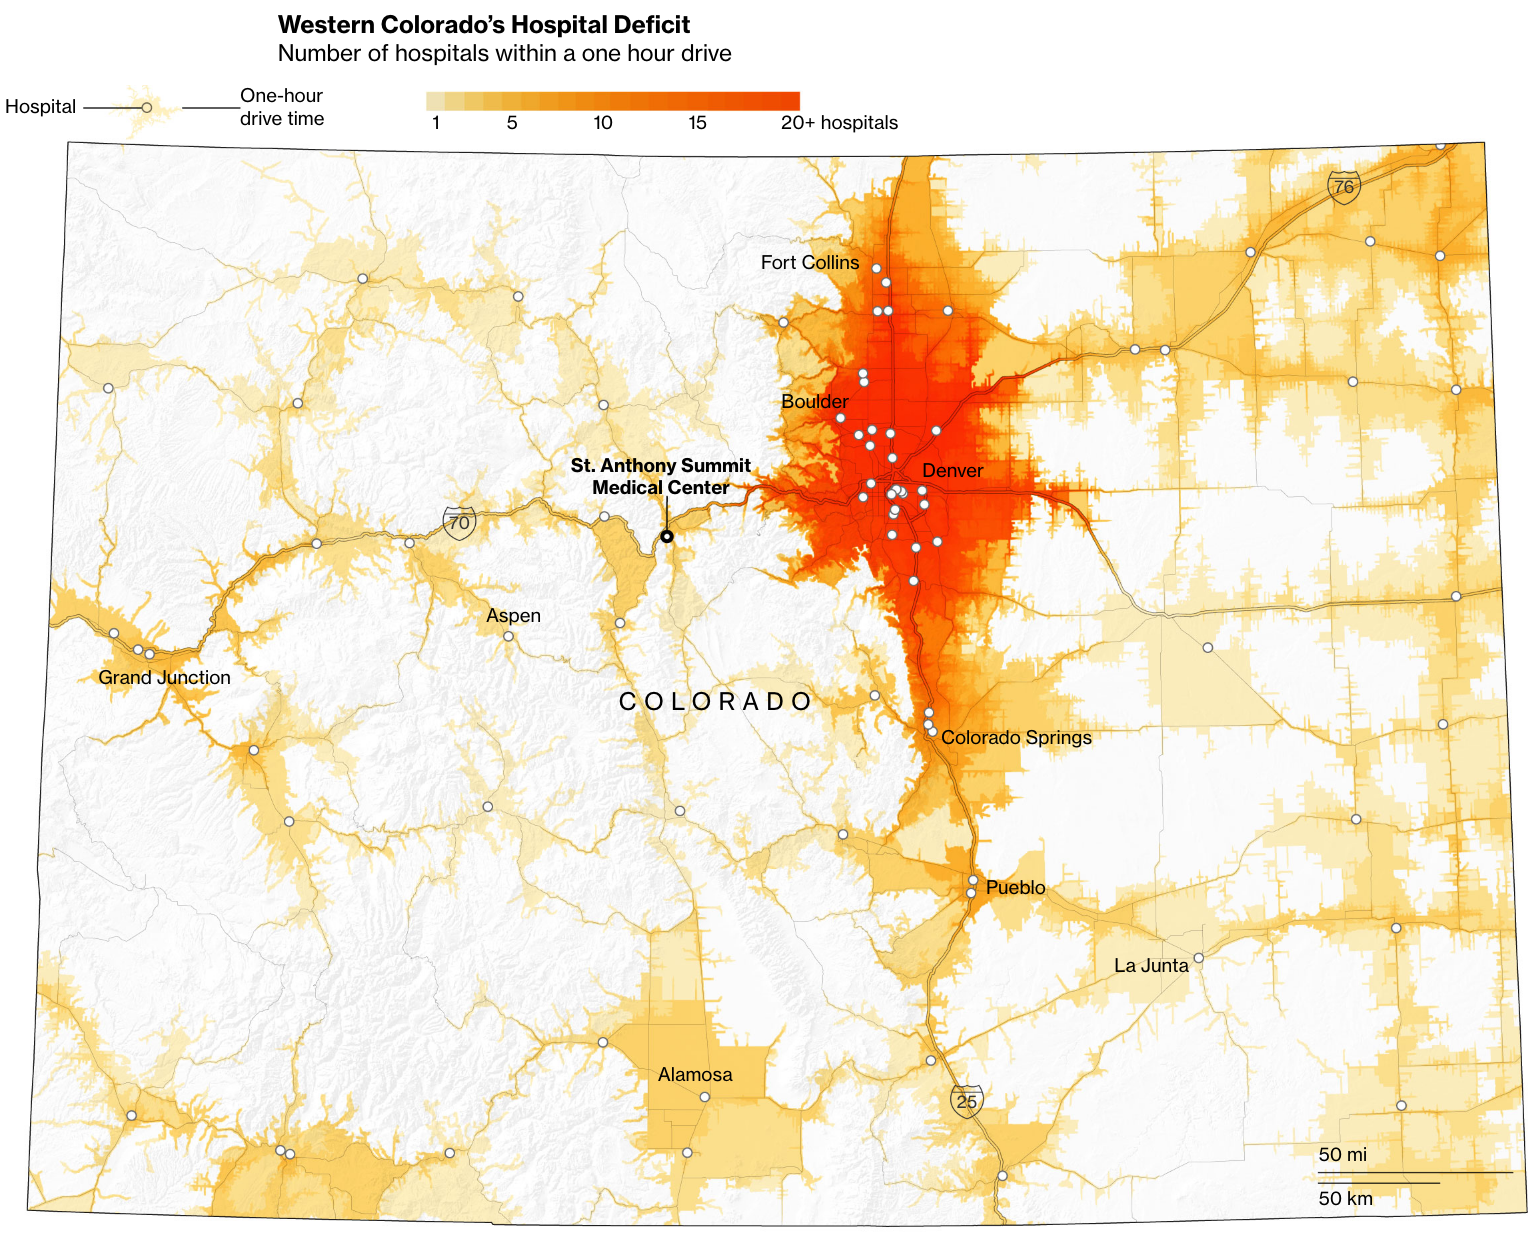 Map of Colorado showing number of hospitals in one hour driving time